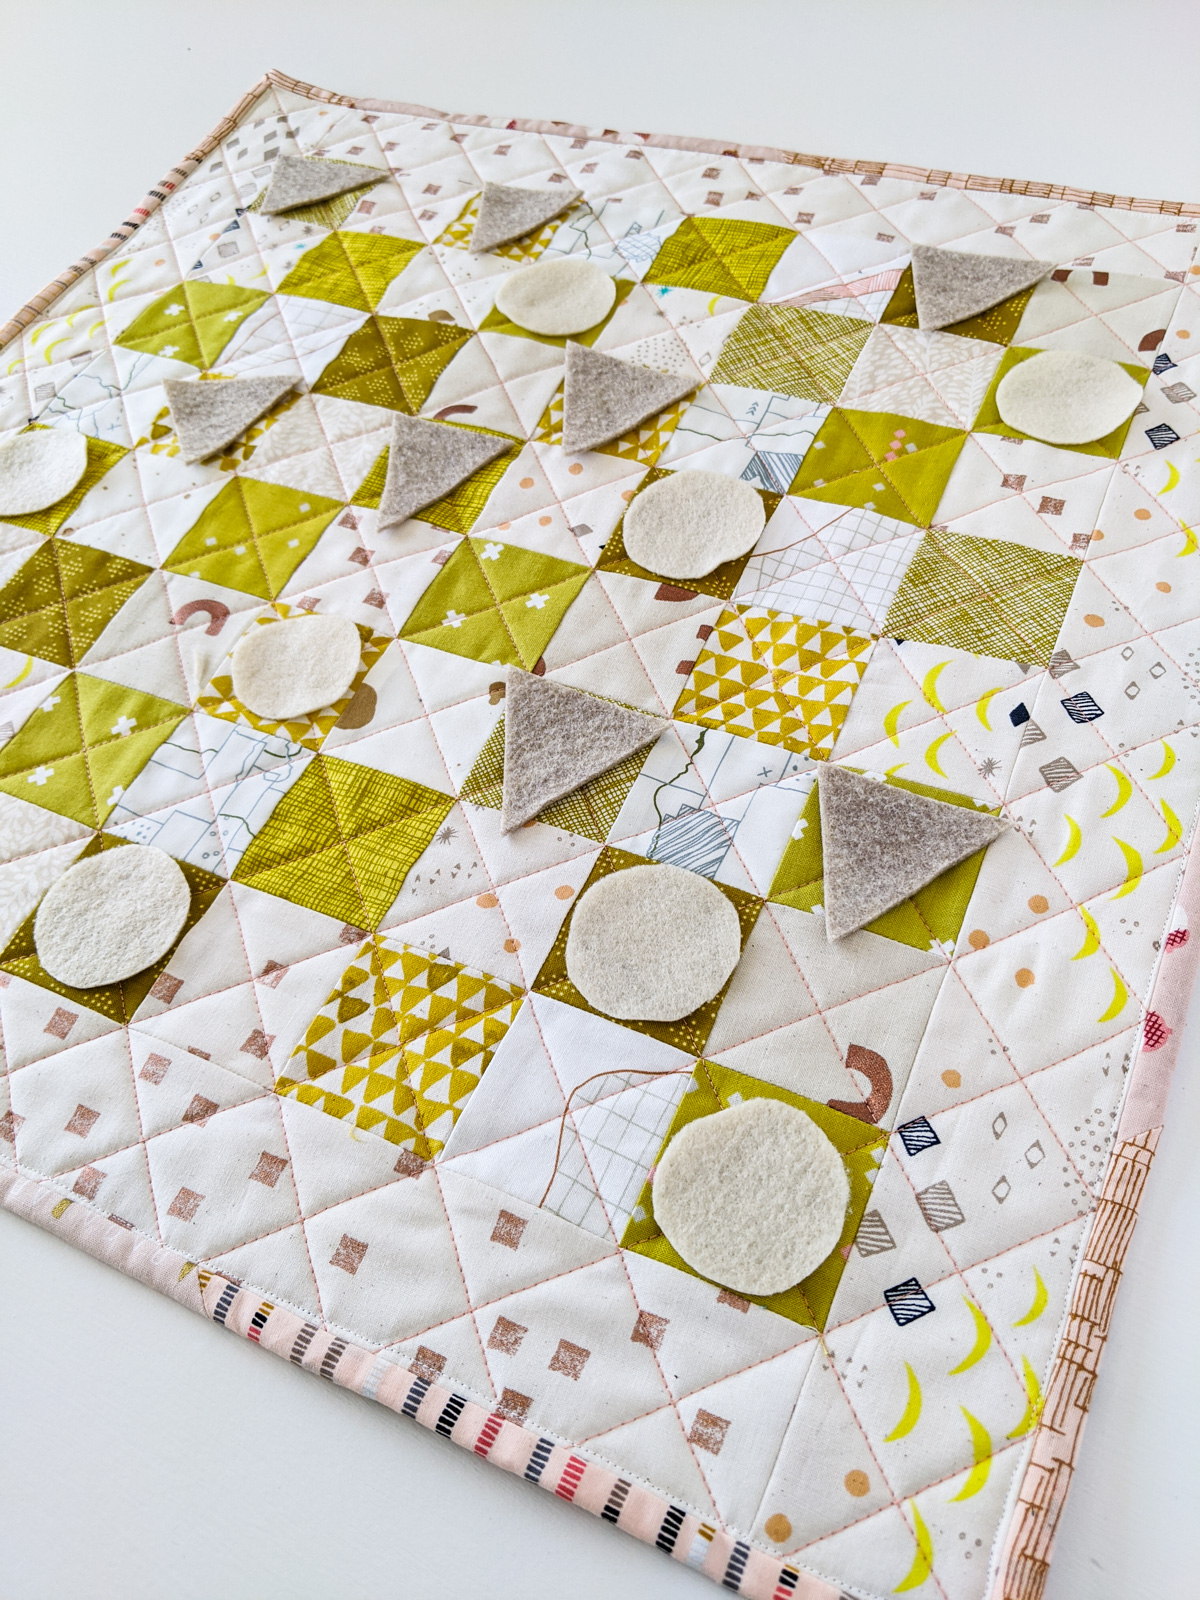 Learn all of the skills needed to make a quilt with this free DIY quilted checkerboard tutorial. A great sewing project for kids! suzyquilts.com #quilttutorial #sewingtutorial